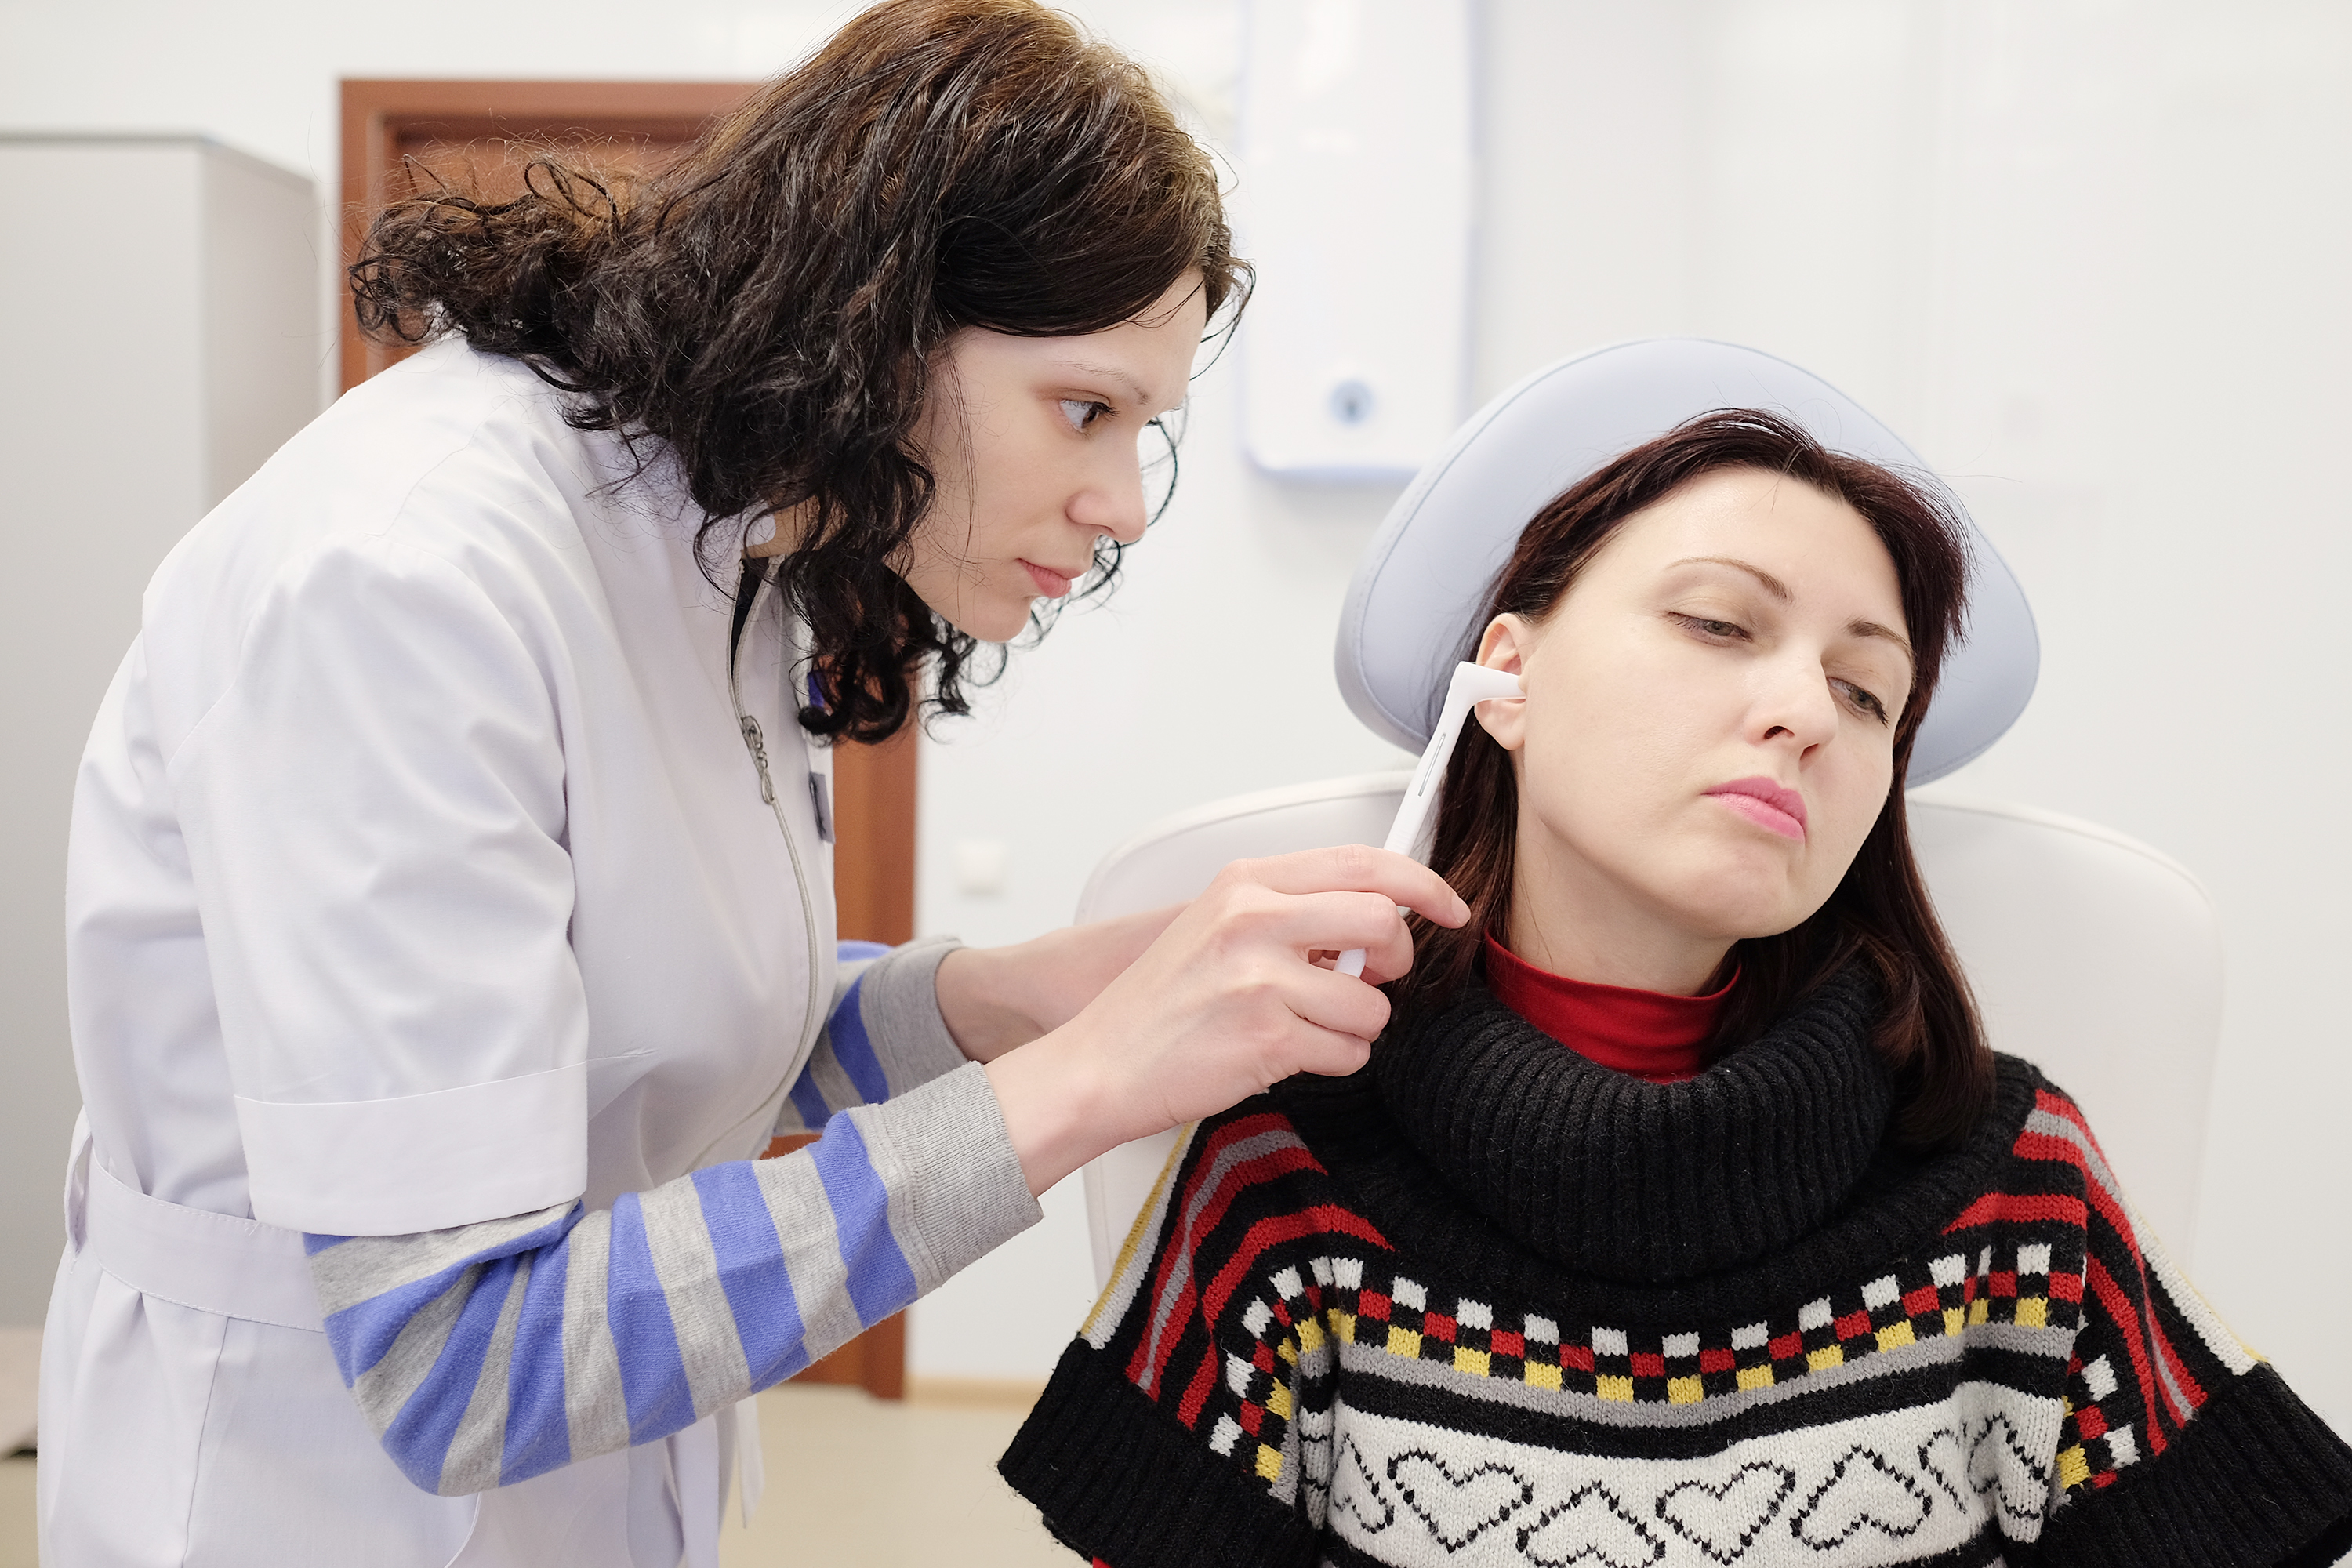 A female doctor examines the ear of a female patient suffering from chronic eustachian tube dysfunction.